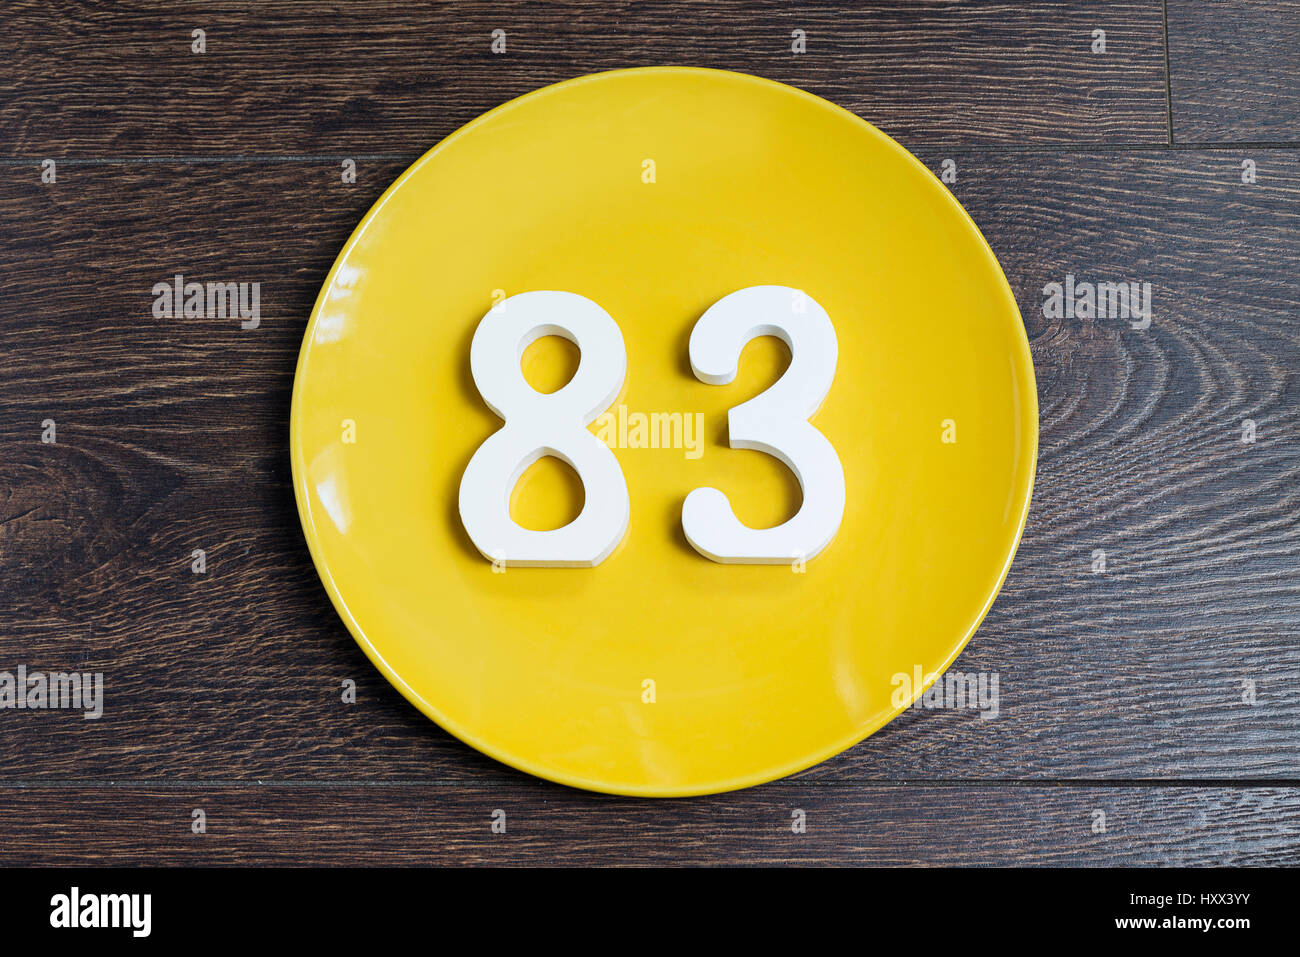 The figure is eighty-three at the plate yellow and brown background. Stock Photo